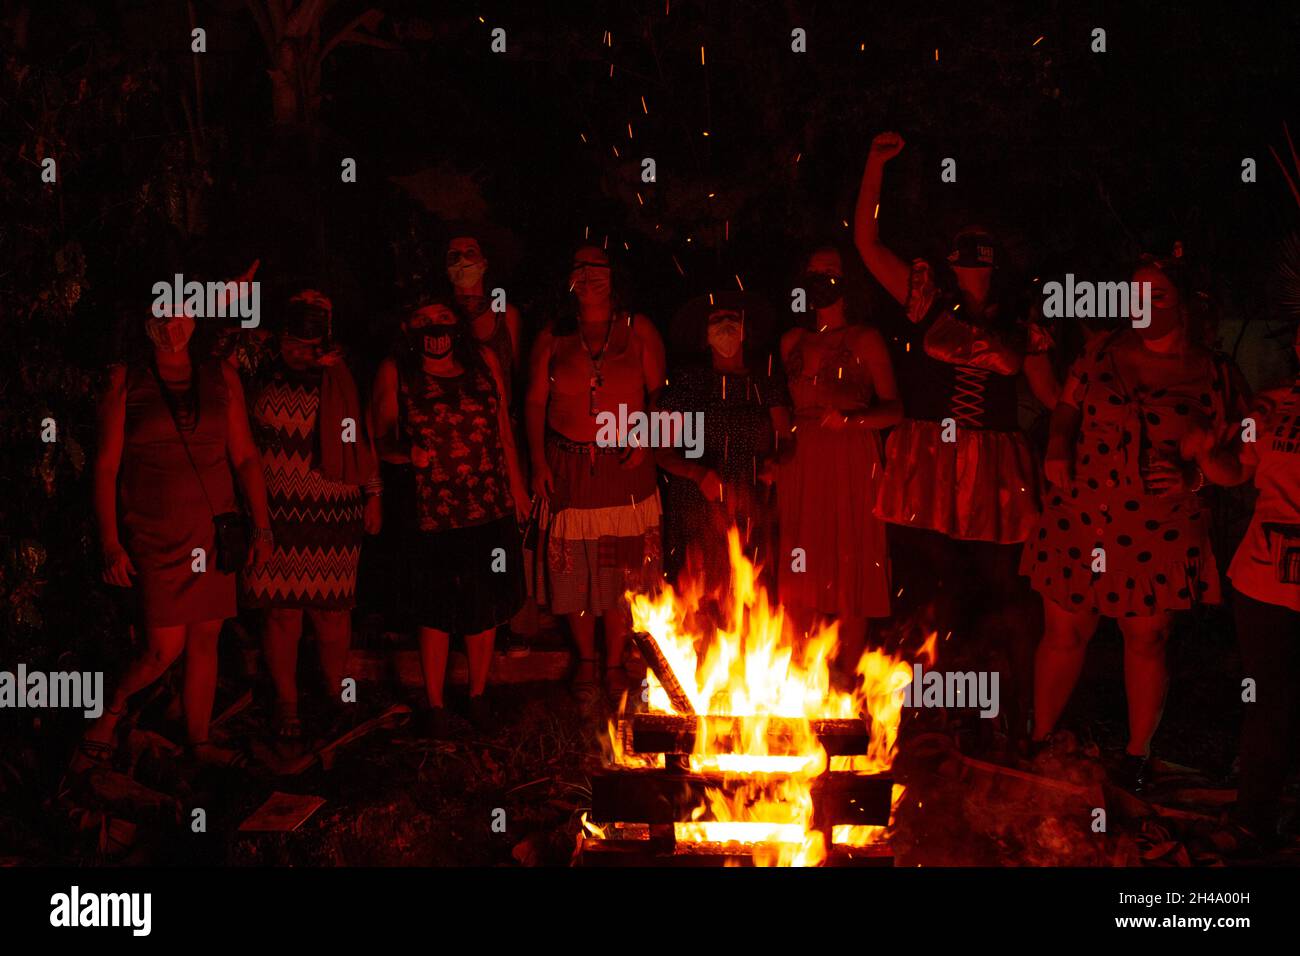 Several women around a campfire. Red Witches Night - was a politically focused Halloween event against President Jair Bolsonaro. Stock Photo